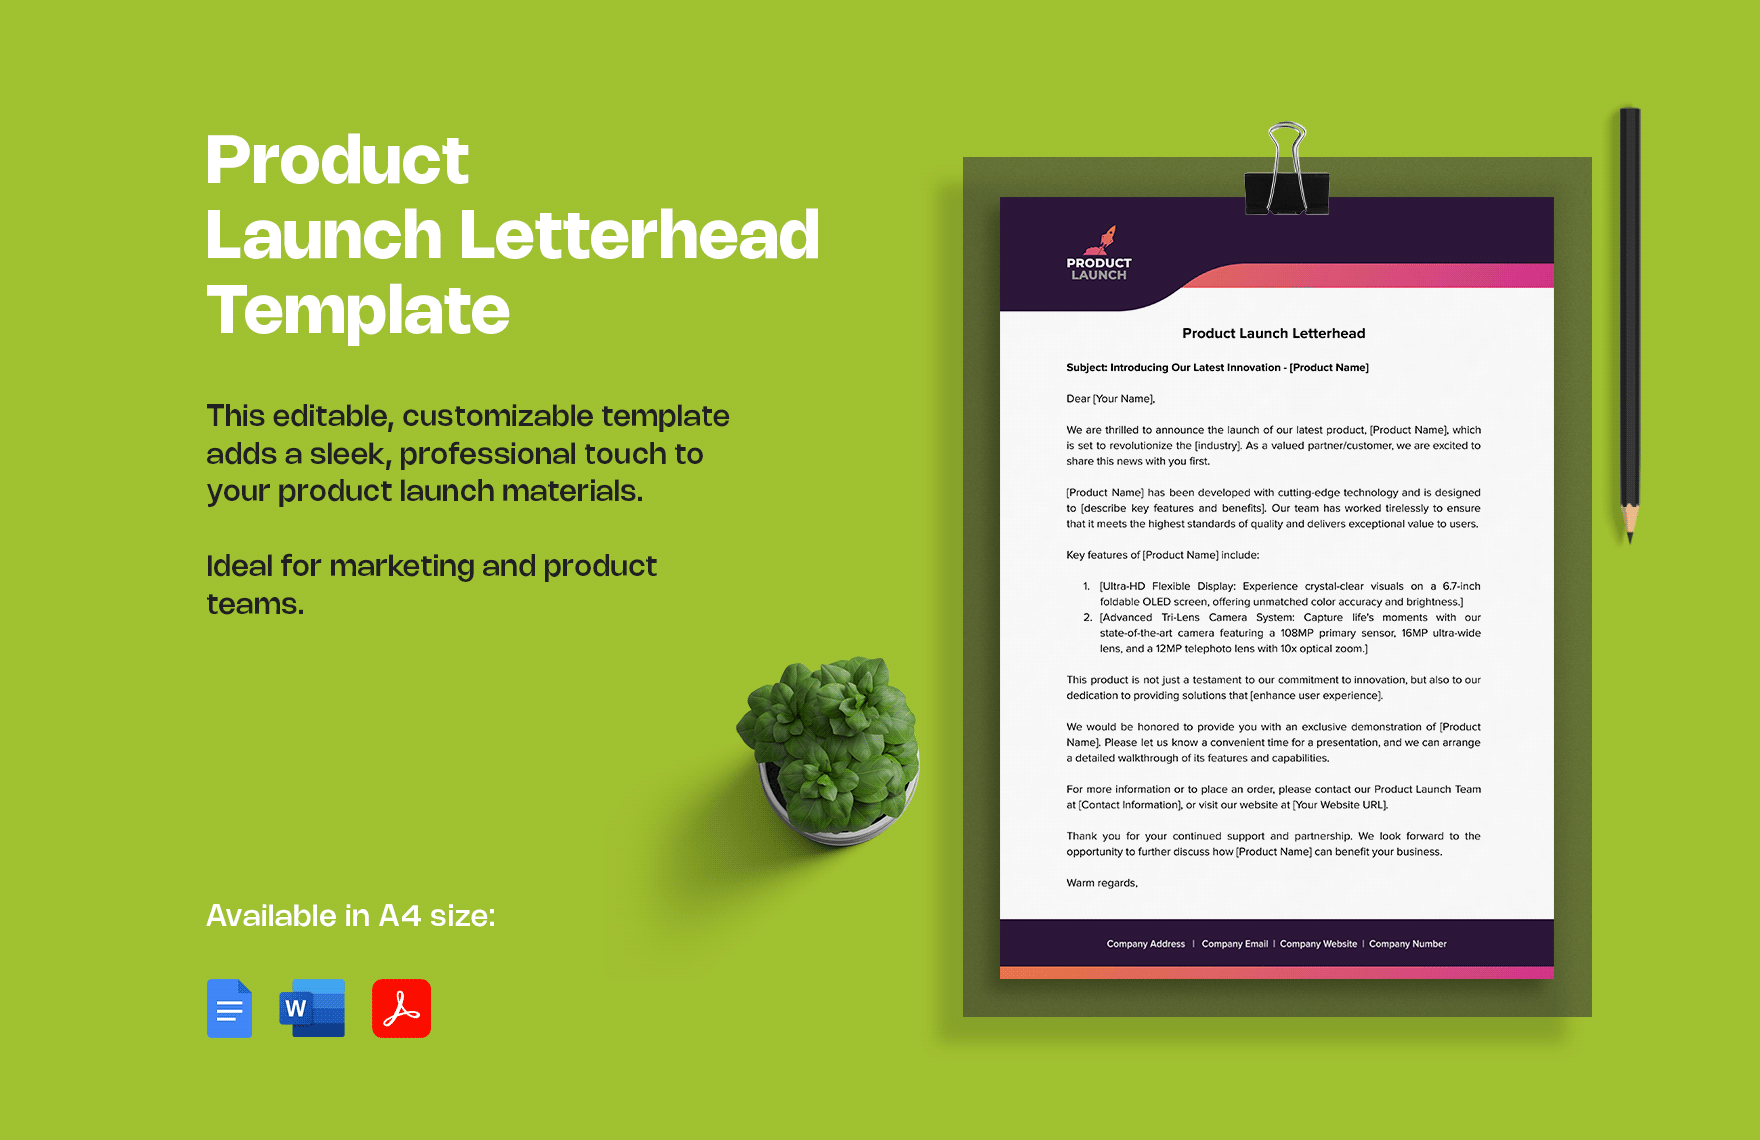 Product Launch Letterhead Template